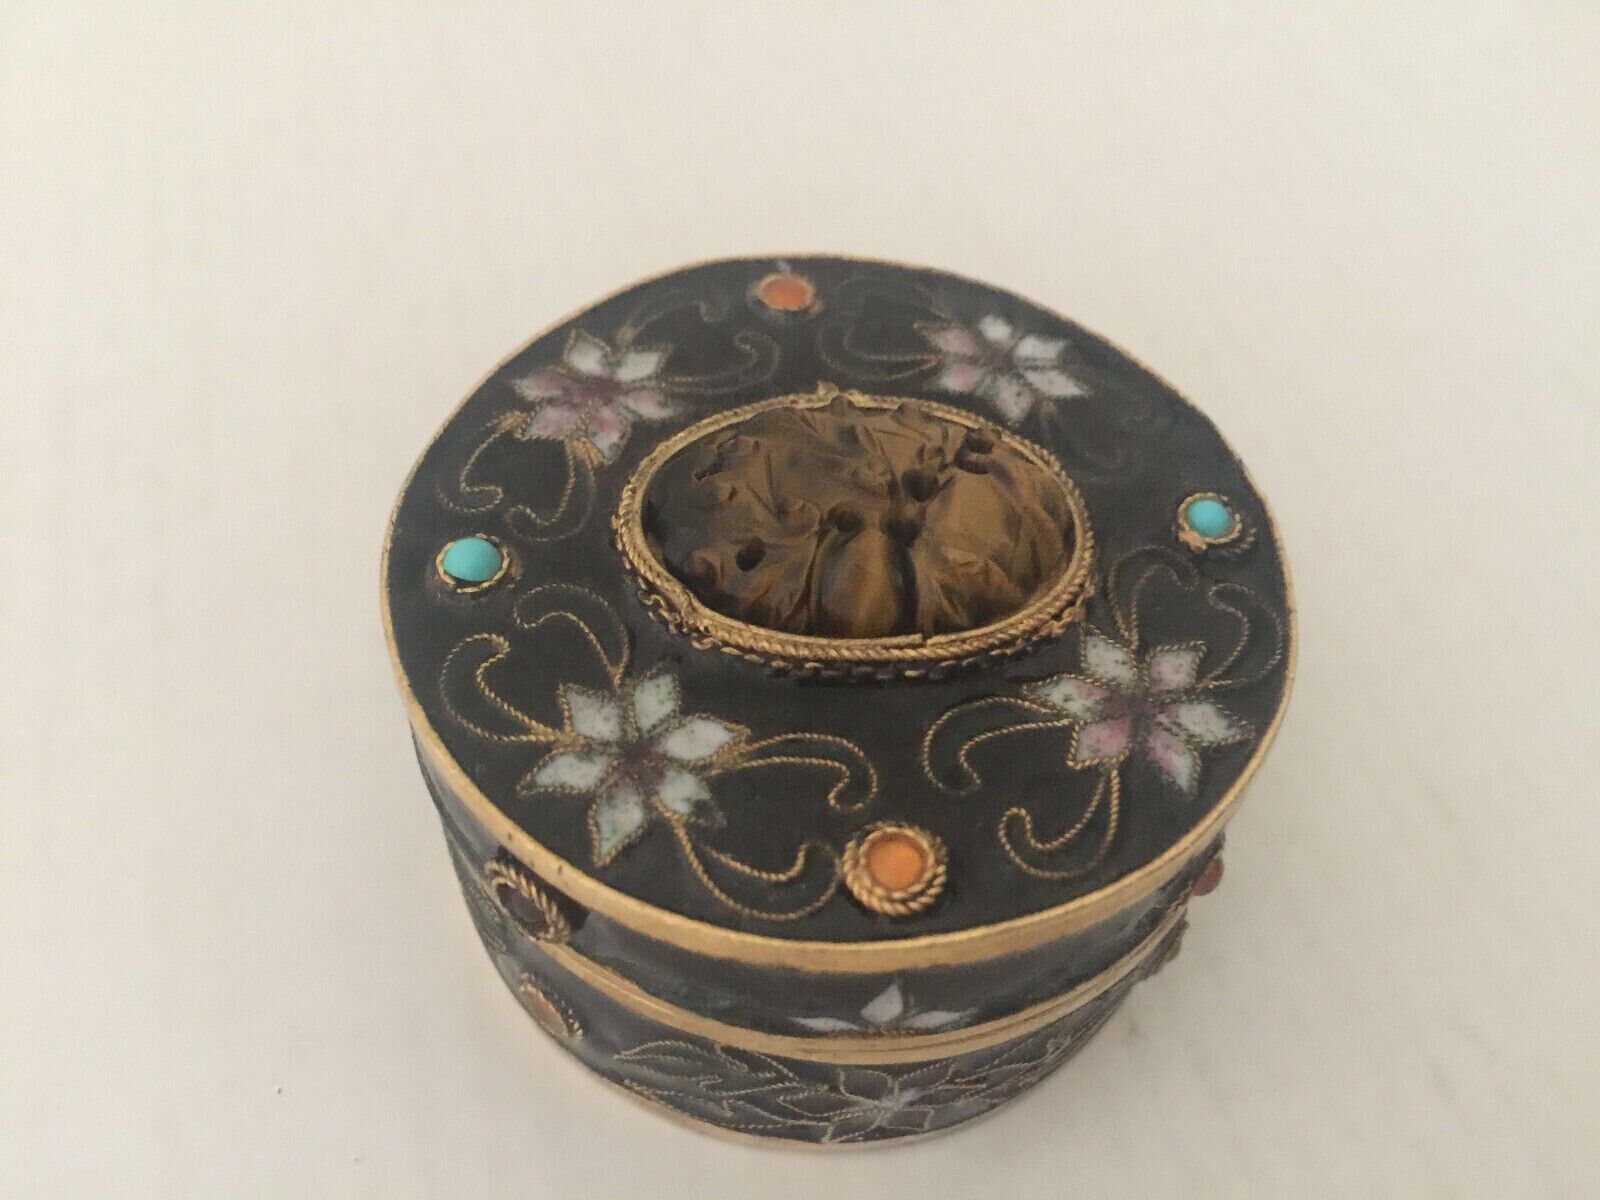 Antique Chinese Cloisonné enamel ornate round Silver box decorated w/ gems 2\